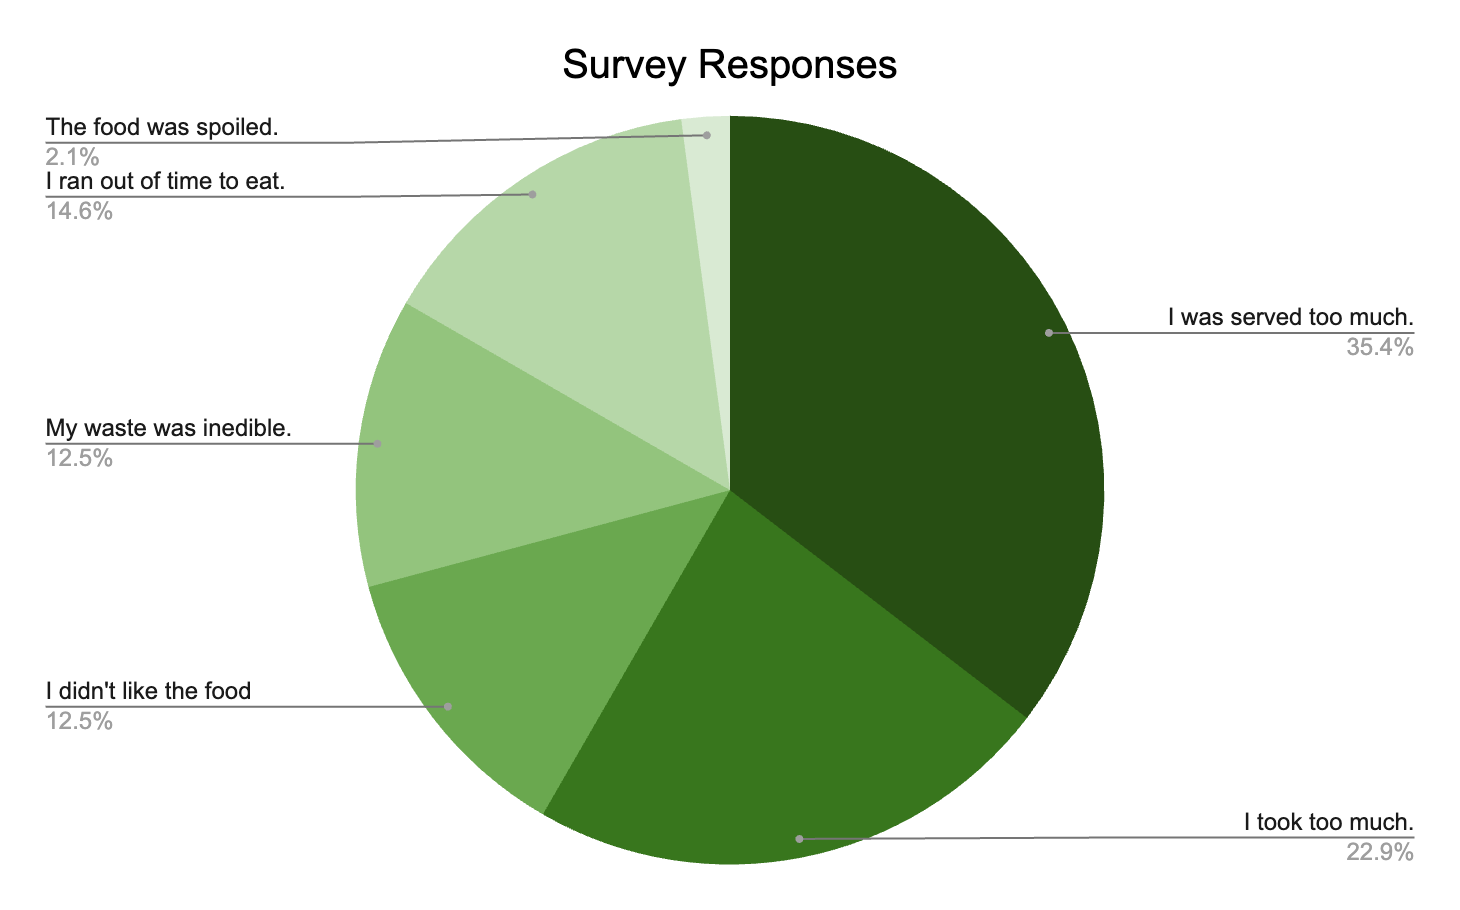 Pie chart of survey responses where the most popular response was that diners were served too much.  